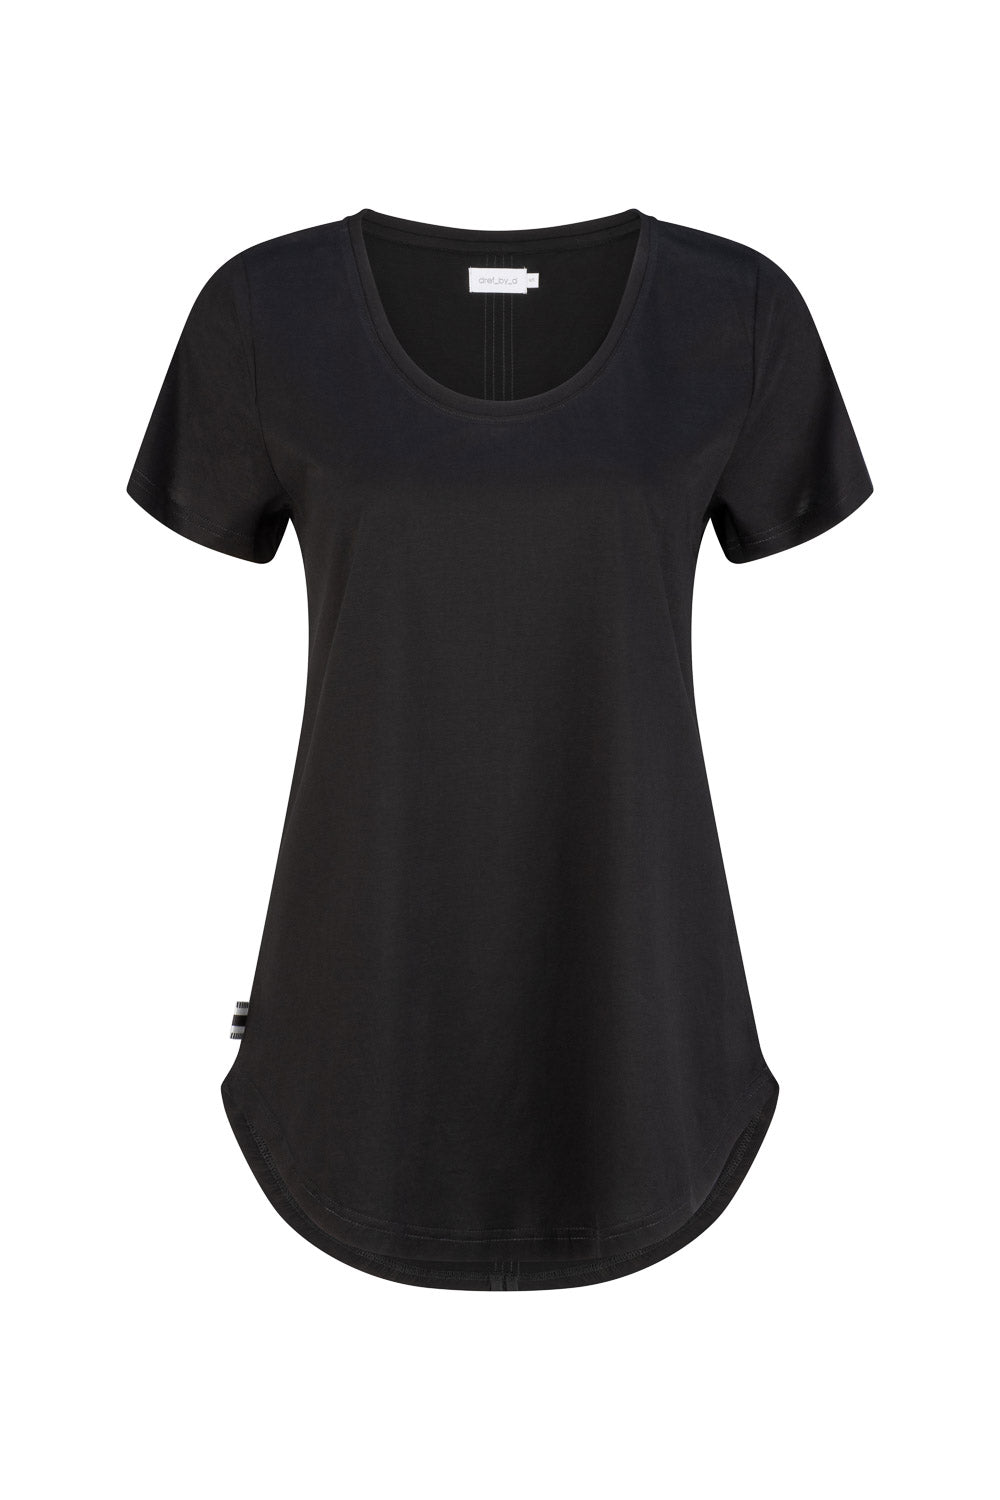 Dref By D Women's London Fitted Cotton Tee - Black